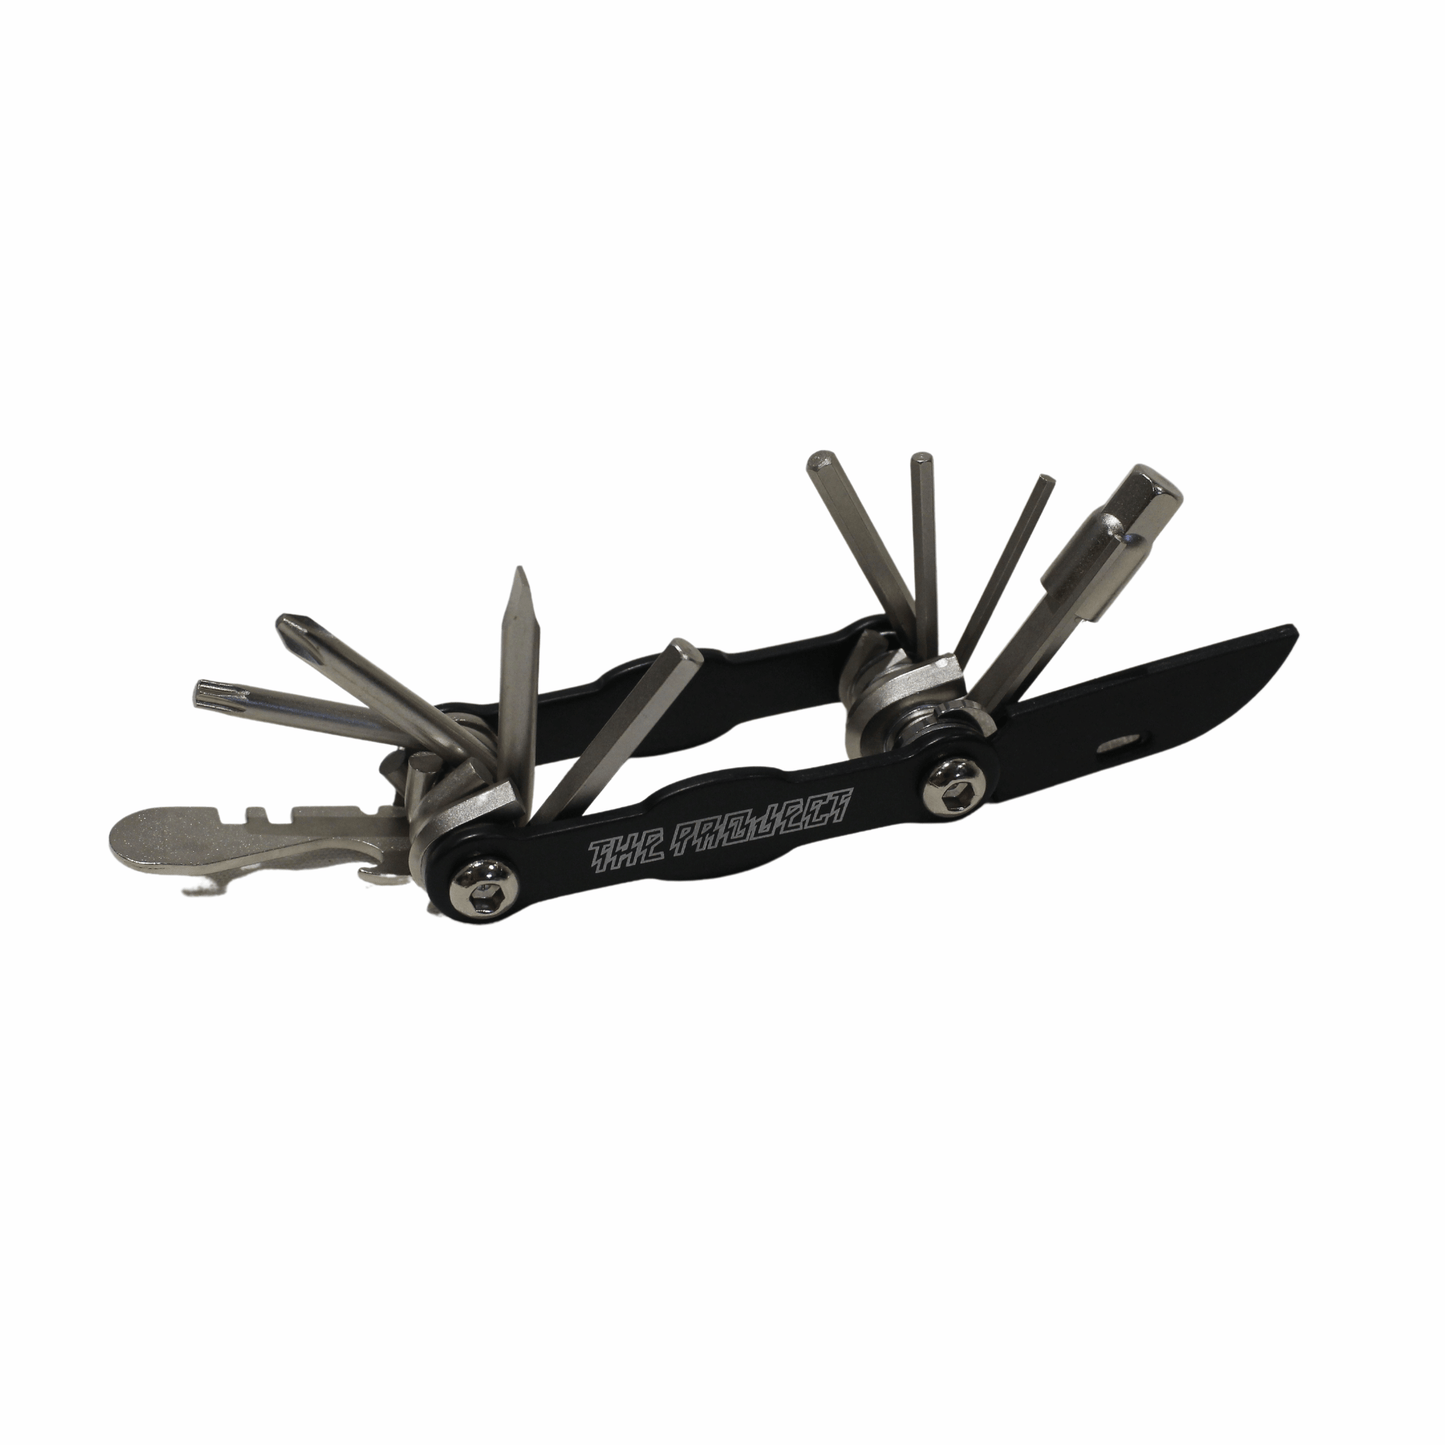 The Project Multi-Tool 12 in 1